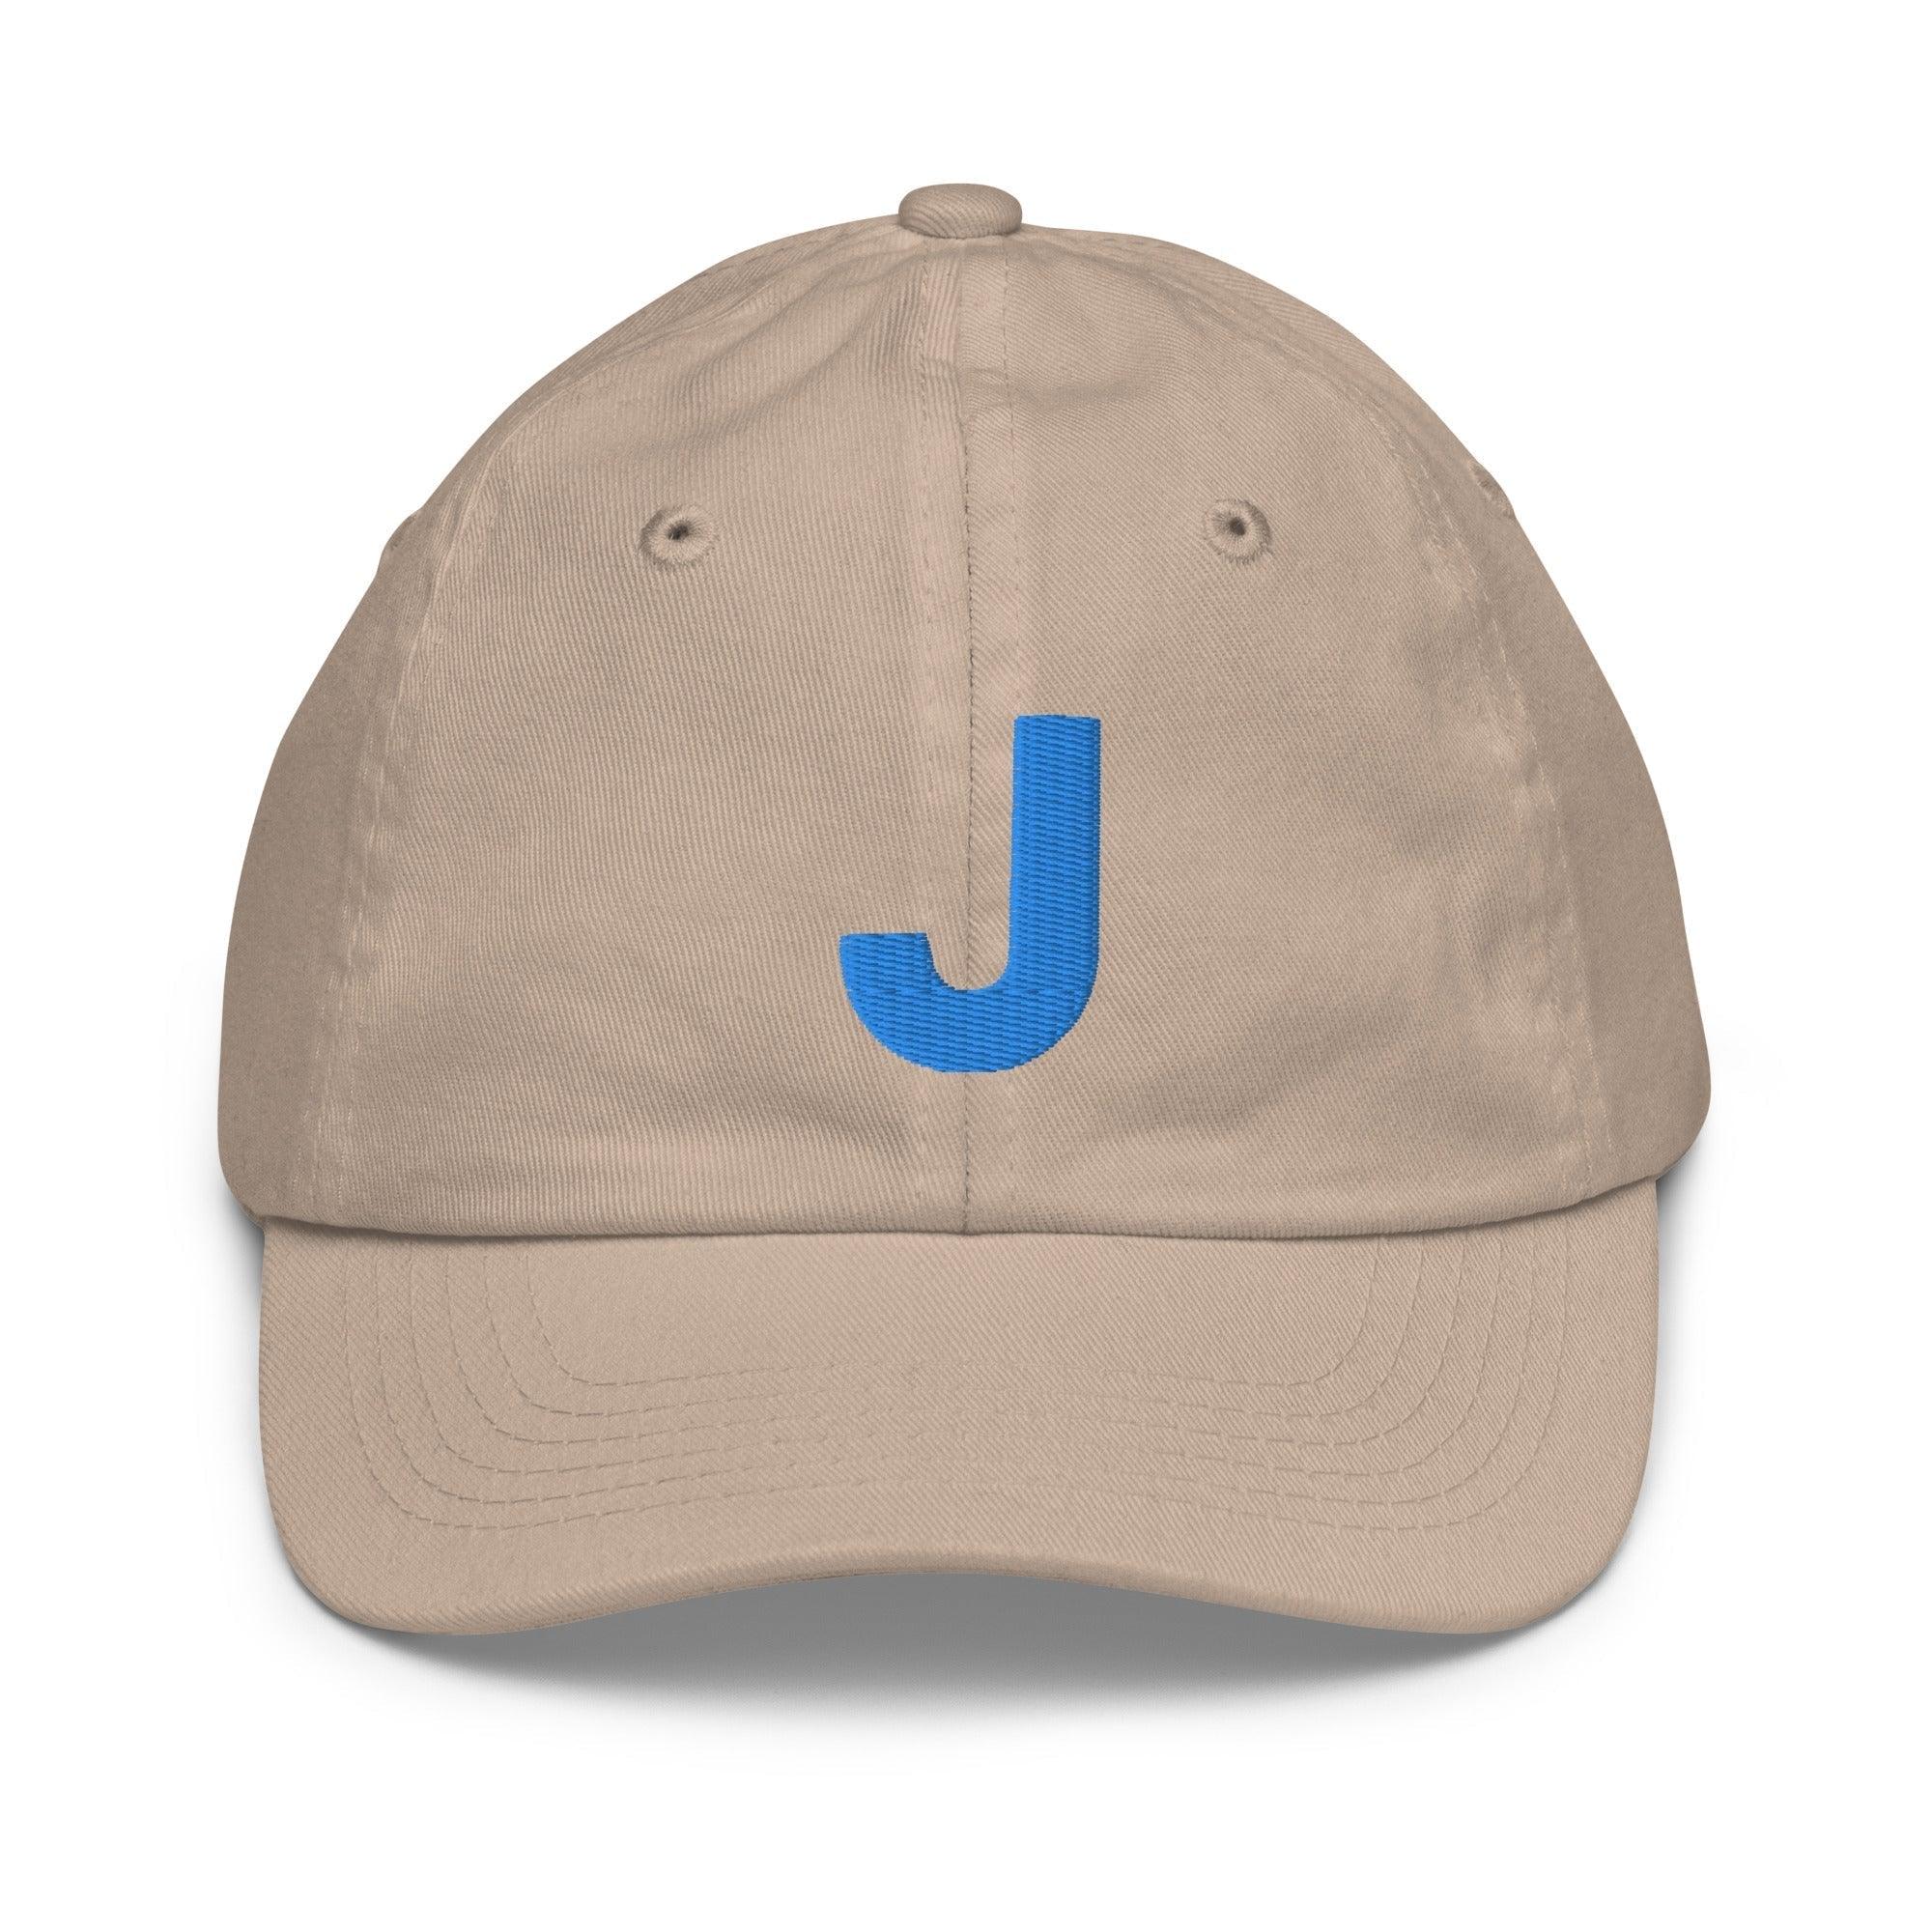 Monogram Embroidered Dad Hat for Kids - Personalized! Polychrome Goods